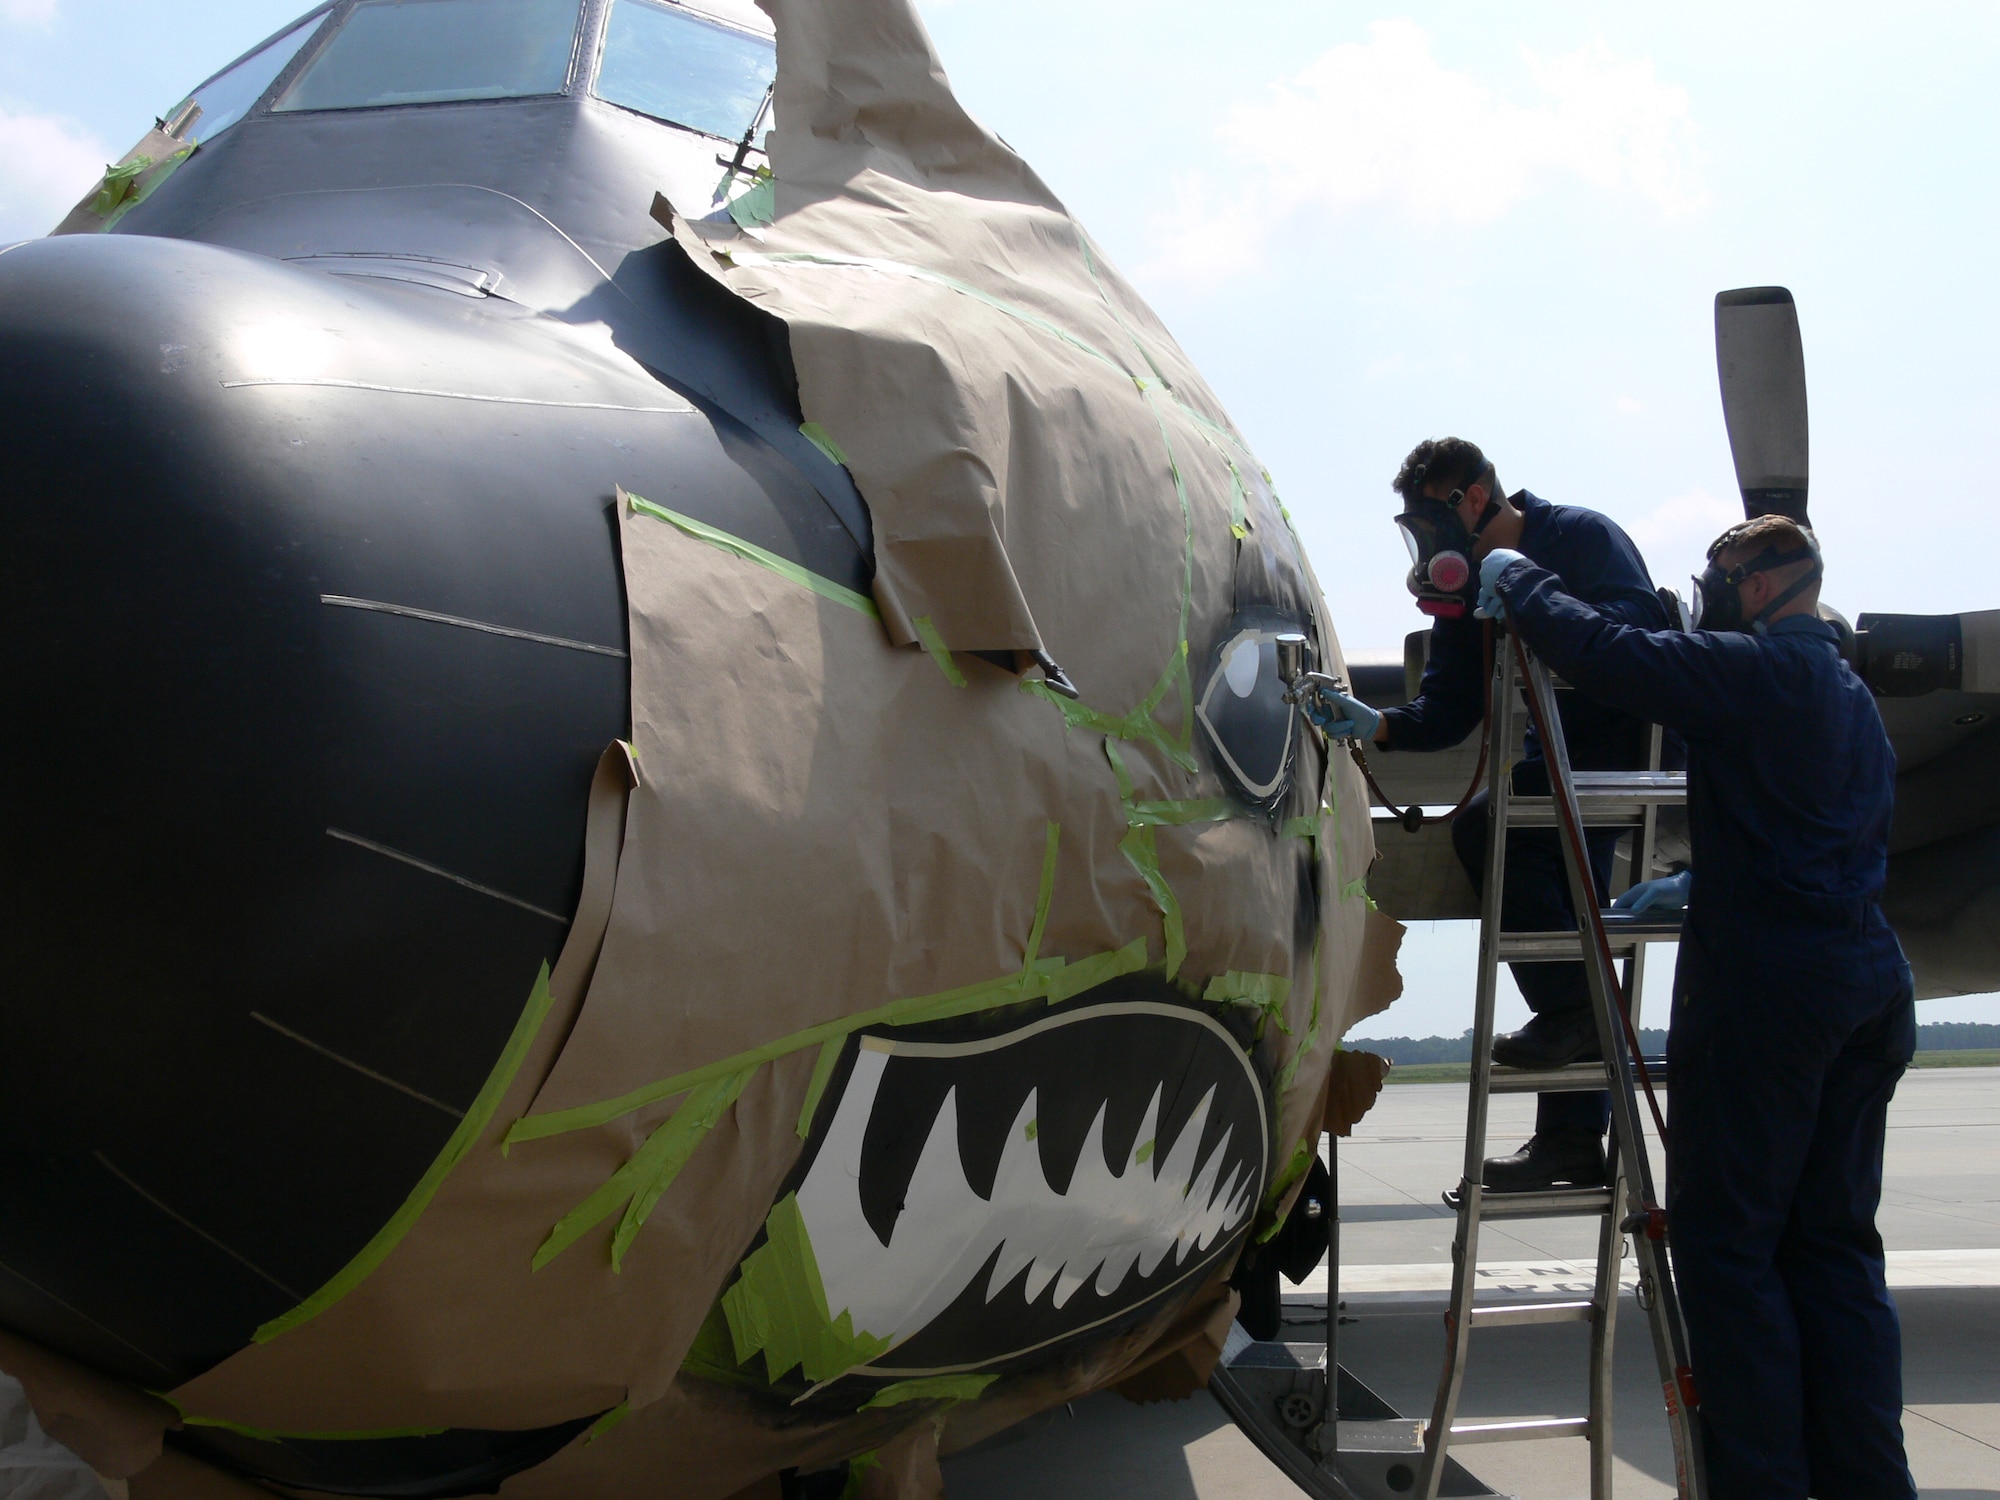 Airmen 1st Class Ernesto Sosa and Nicholas Heimgartner paint the nose of a C-130E in August at Moody Air Force Base, Ga. The aircraft was repainted to represent the 347th Rescue Wing's upcoming transition to the 23rd Wing, known as the famous "Flying Tigers." The 347th RQW will deactivate and the 23rd Wing will activate Sept. 29. Airmen Sosa and Heimgartner are from the 347th Maintenance Squadron at Moody AFB. (U.S. Air Force photo/Airman 1st Class Eric Schloeffel)